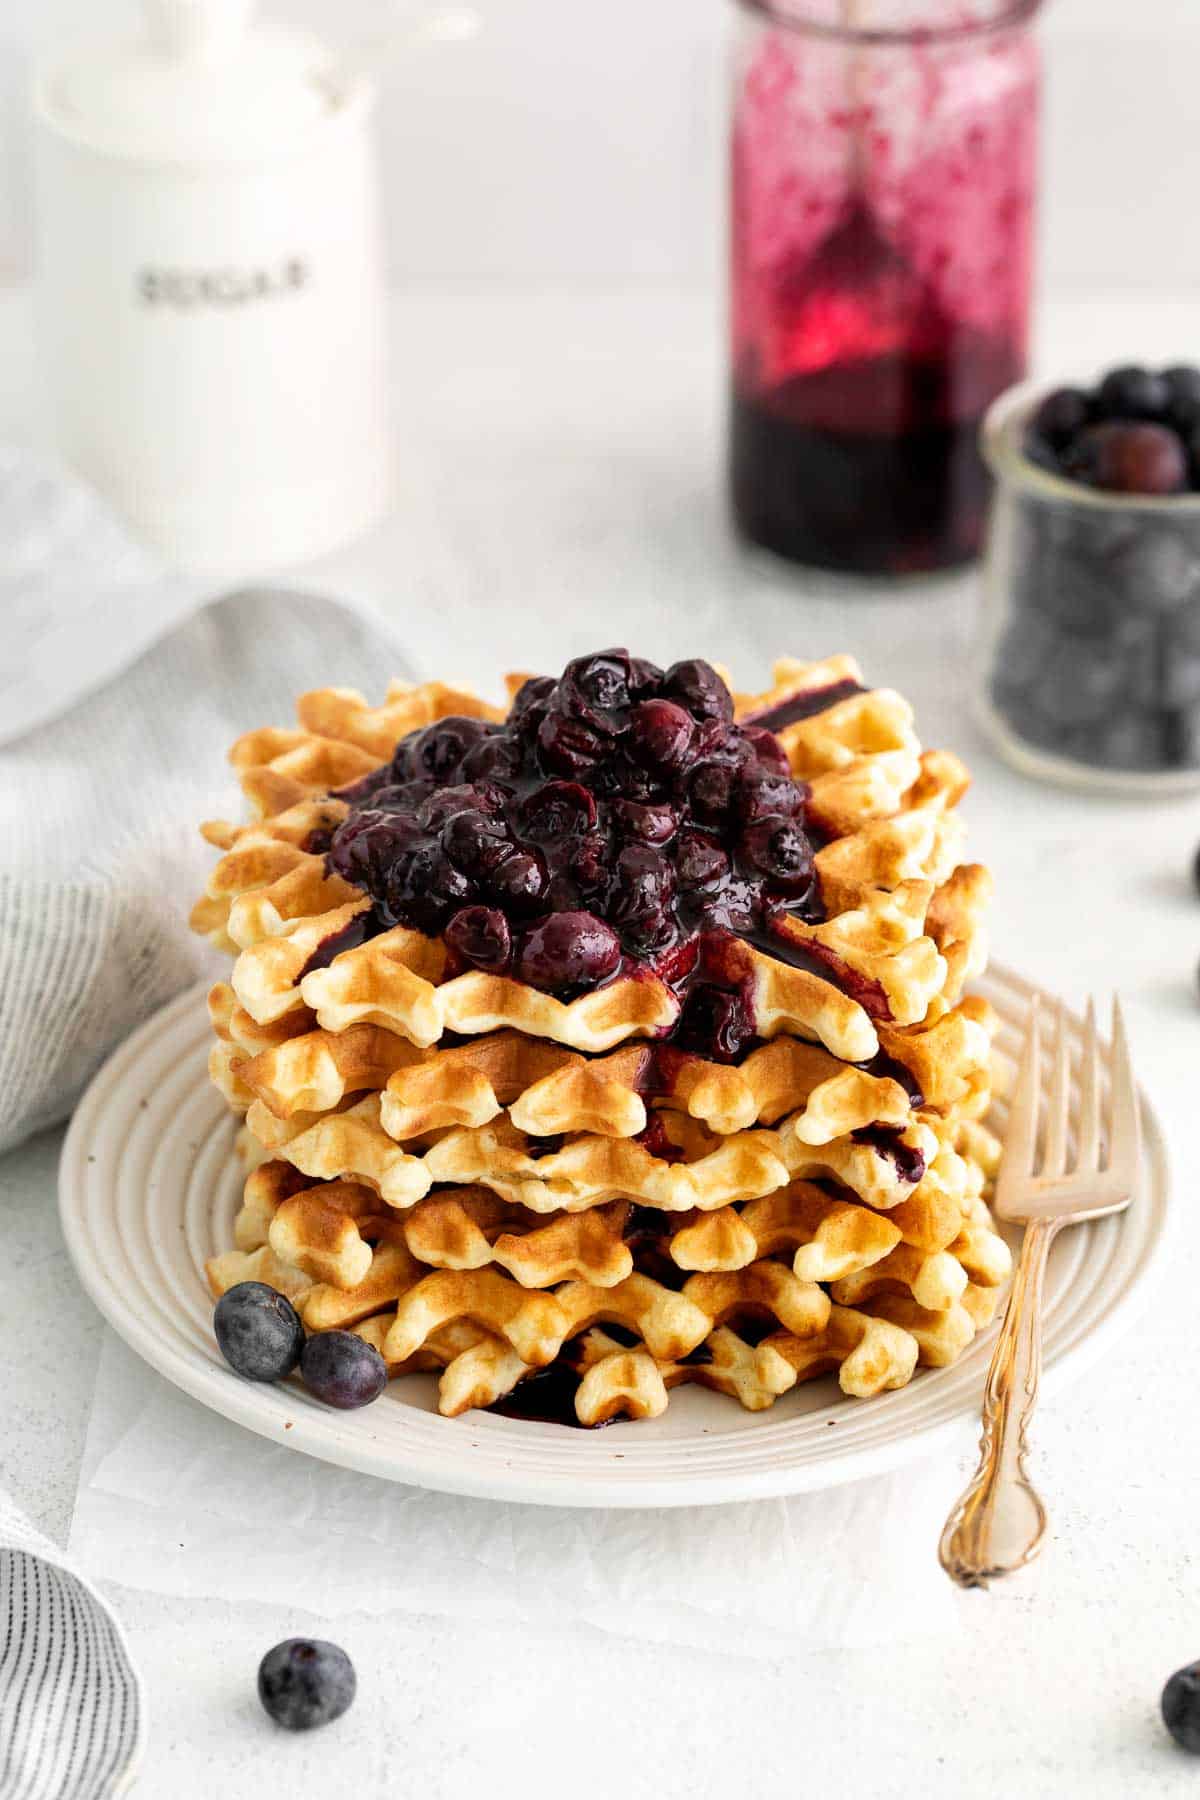 A stack of waffles on a plate, with blueberry compote on top